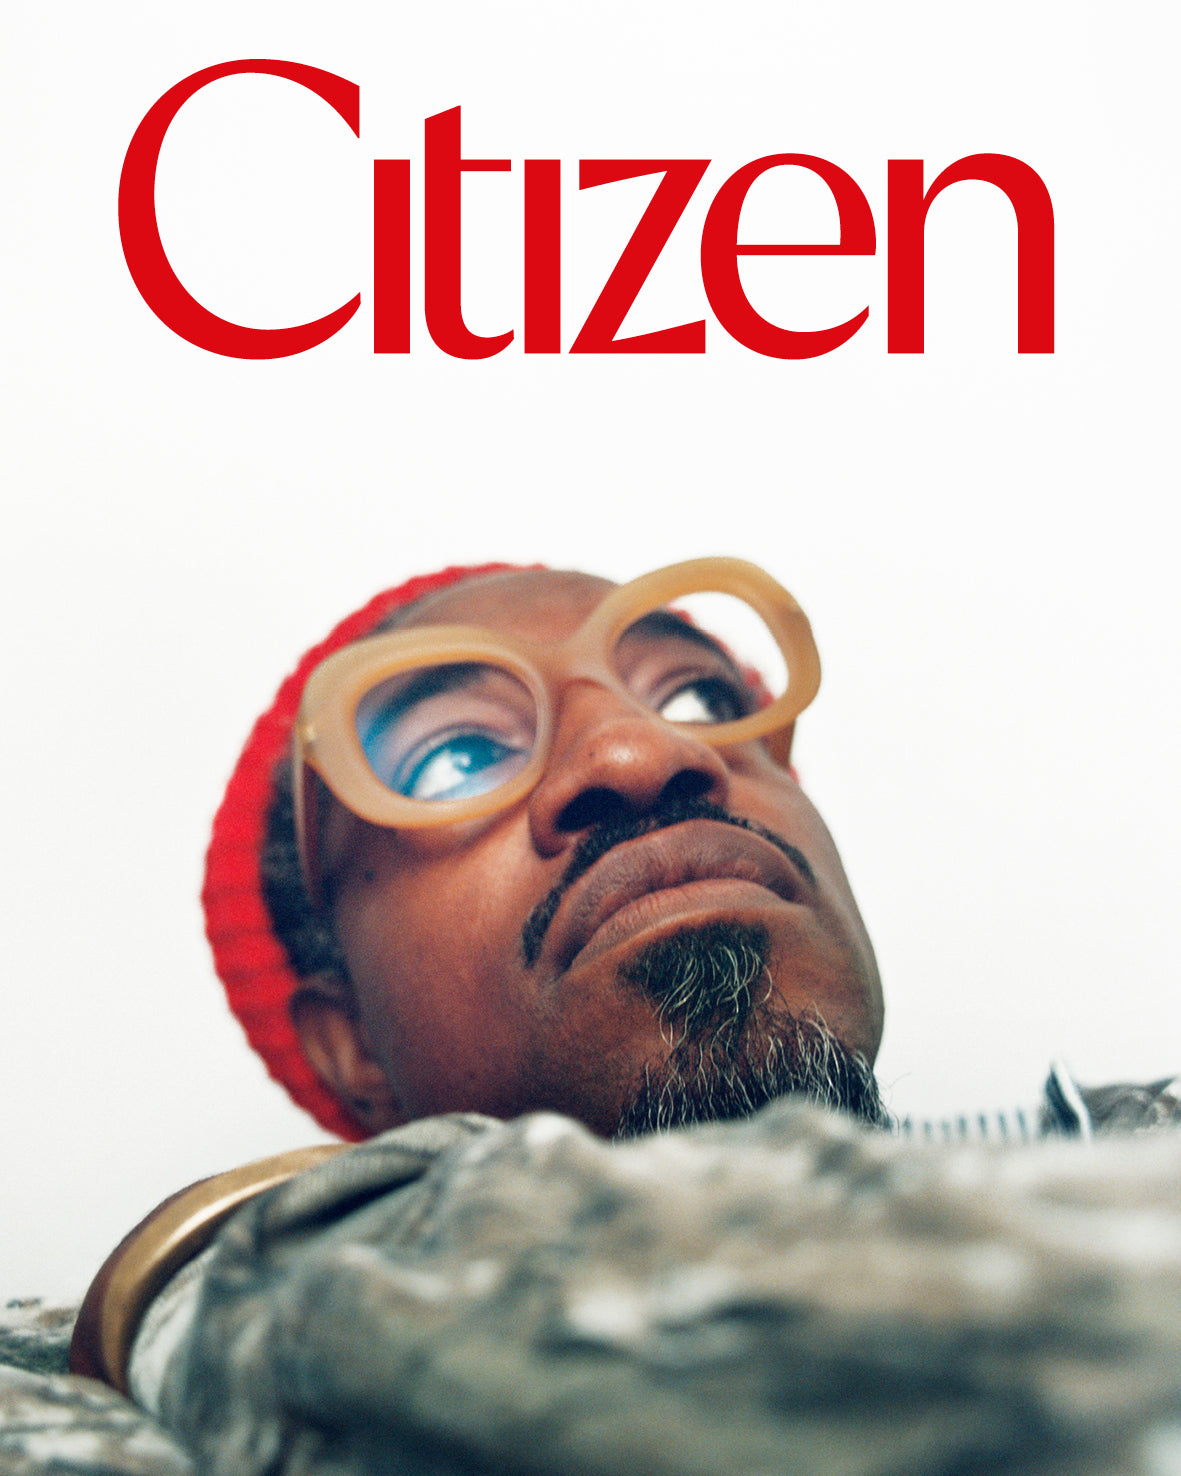 ISSUE 003: FEELING(S), ANDRÉ 3000